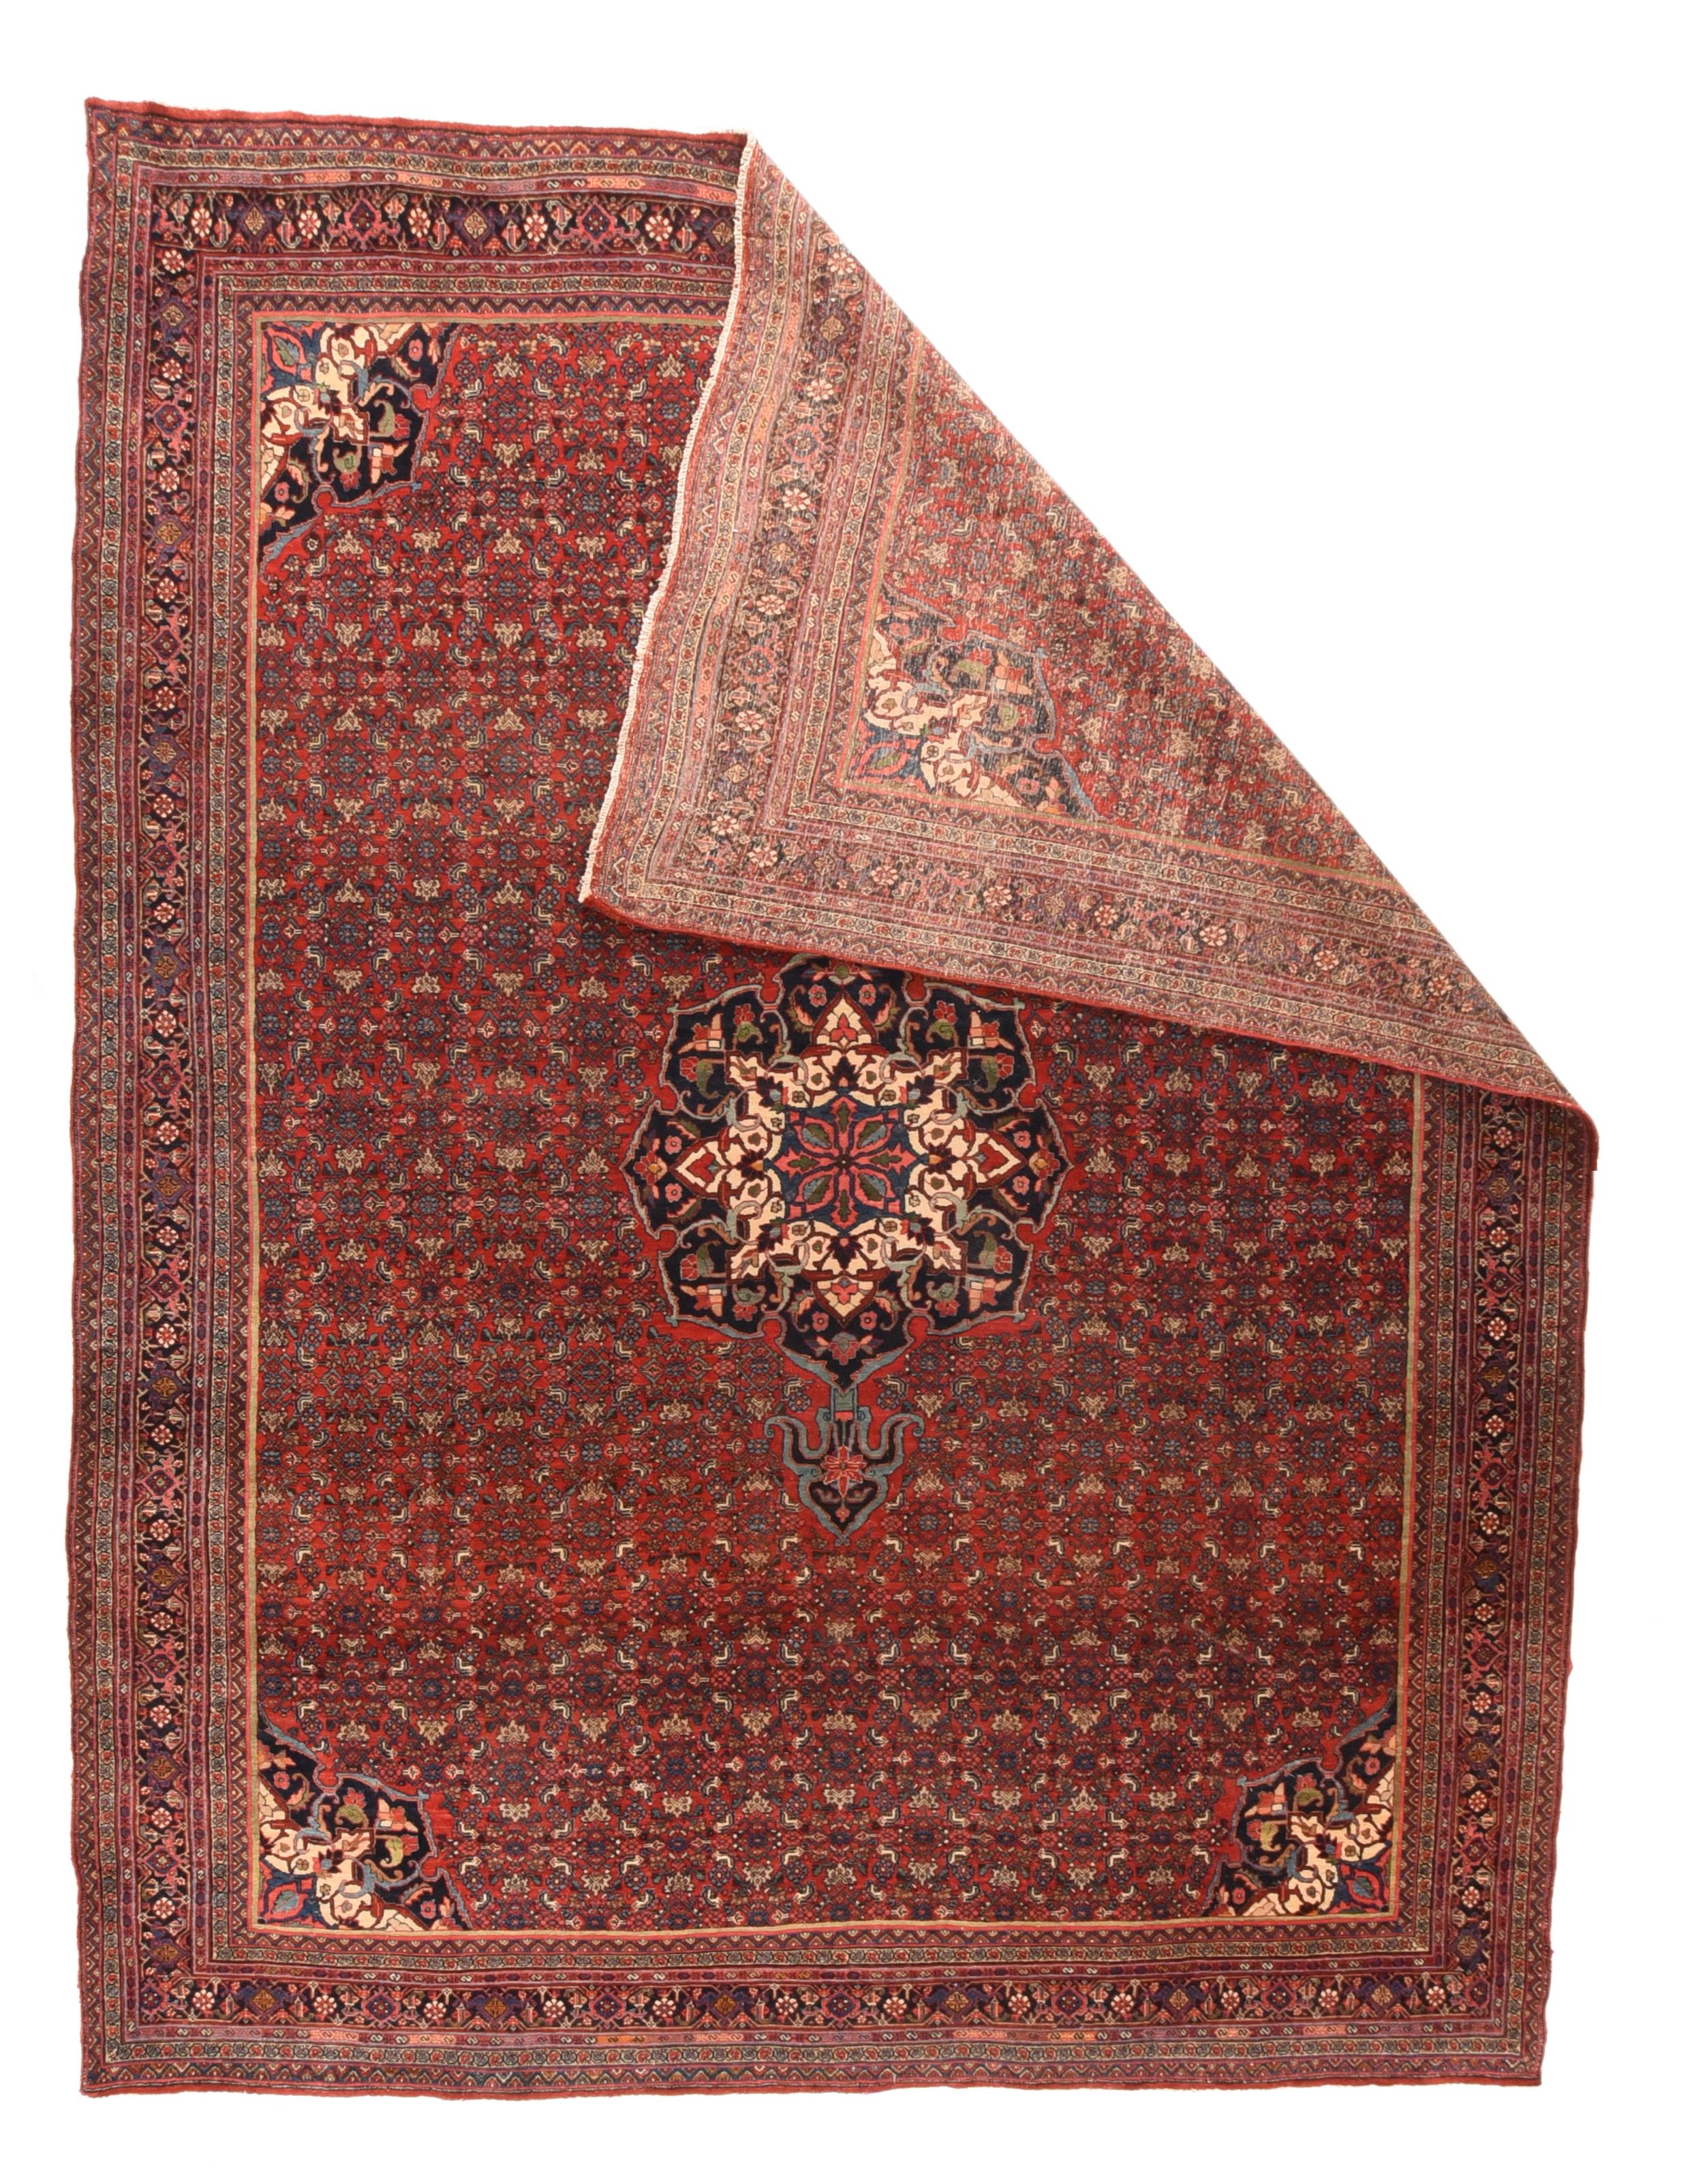 This relatively modern, west Persian Kurdish city carpet on cotton retains the traditional board-like hands and ultra-compact weave. The scarlet field is closely patterned with a small, repeating Herati,. all supporting an octofoil navy medallion